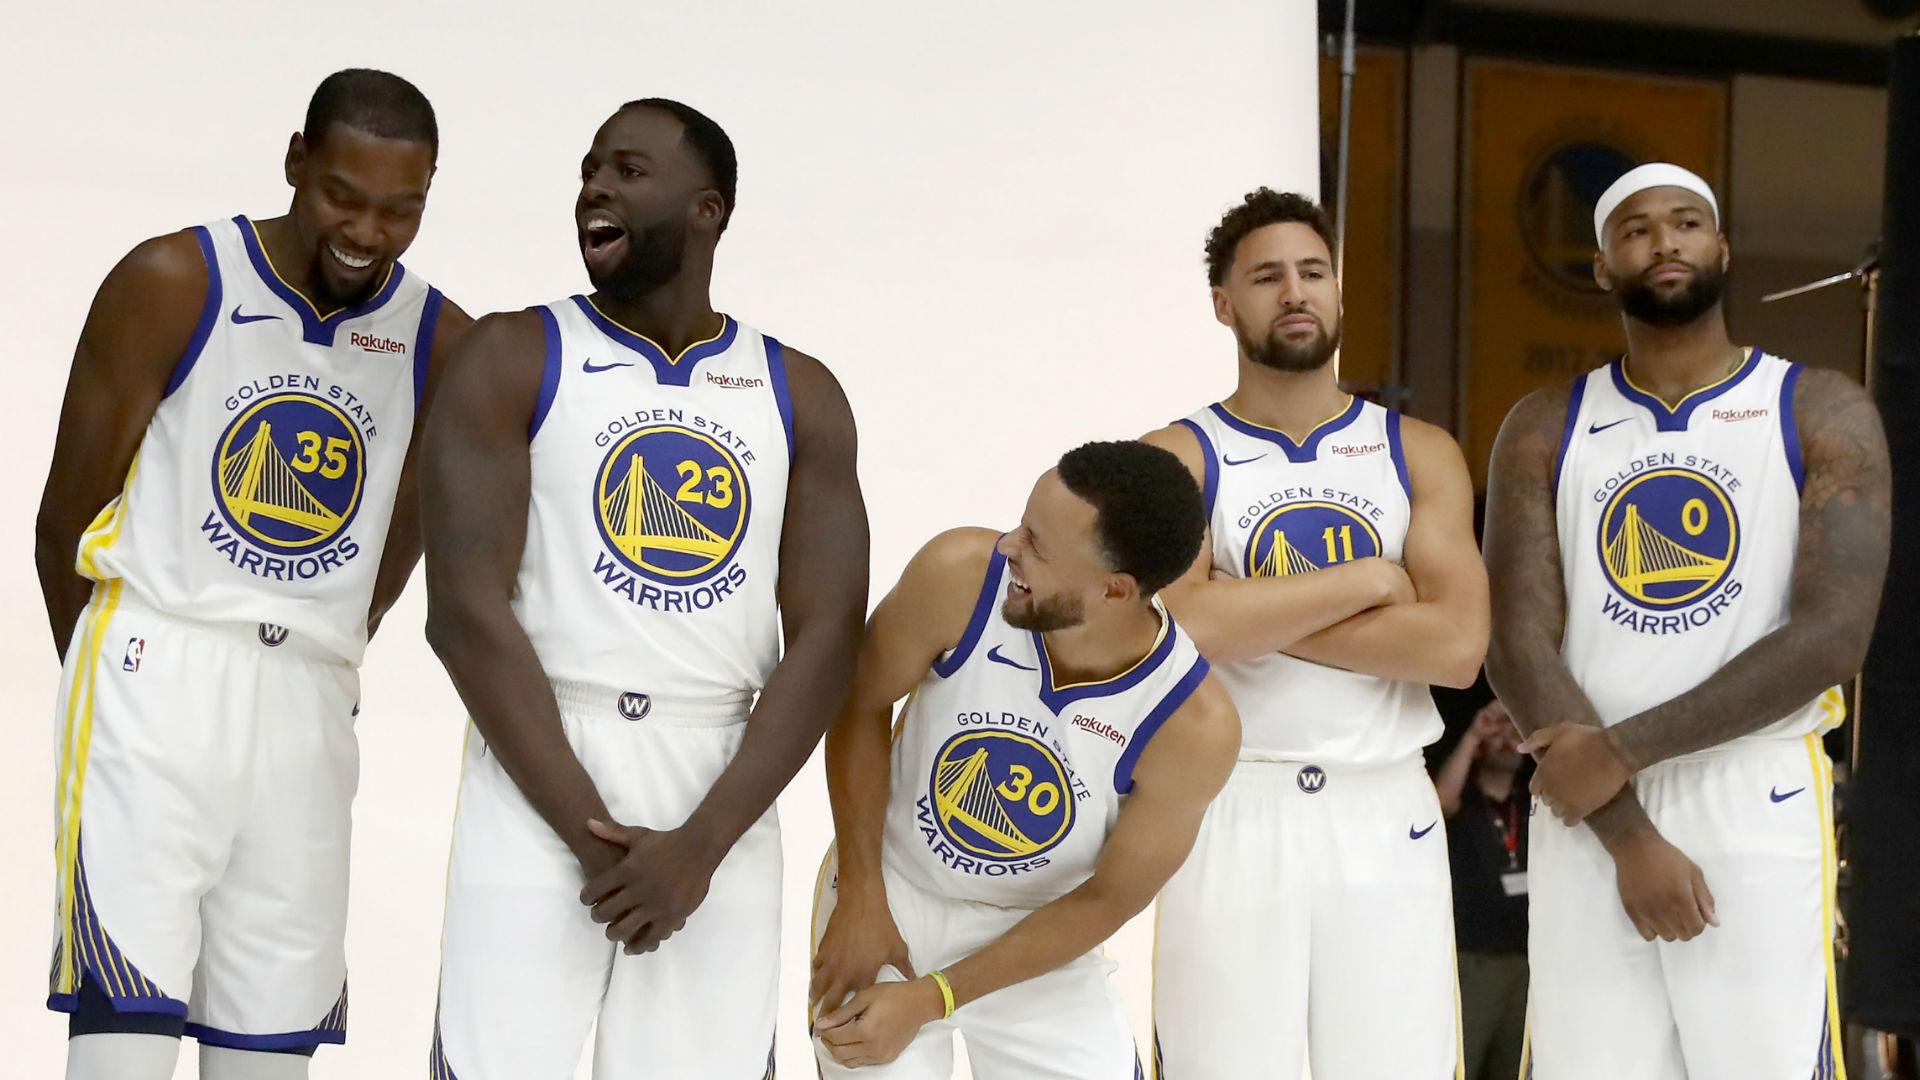 2018 19 NBA Season Preview: What To Expect From The Golden State